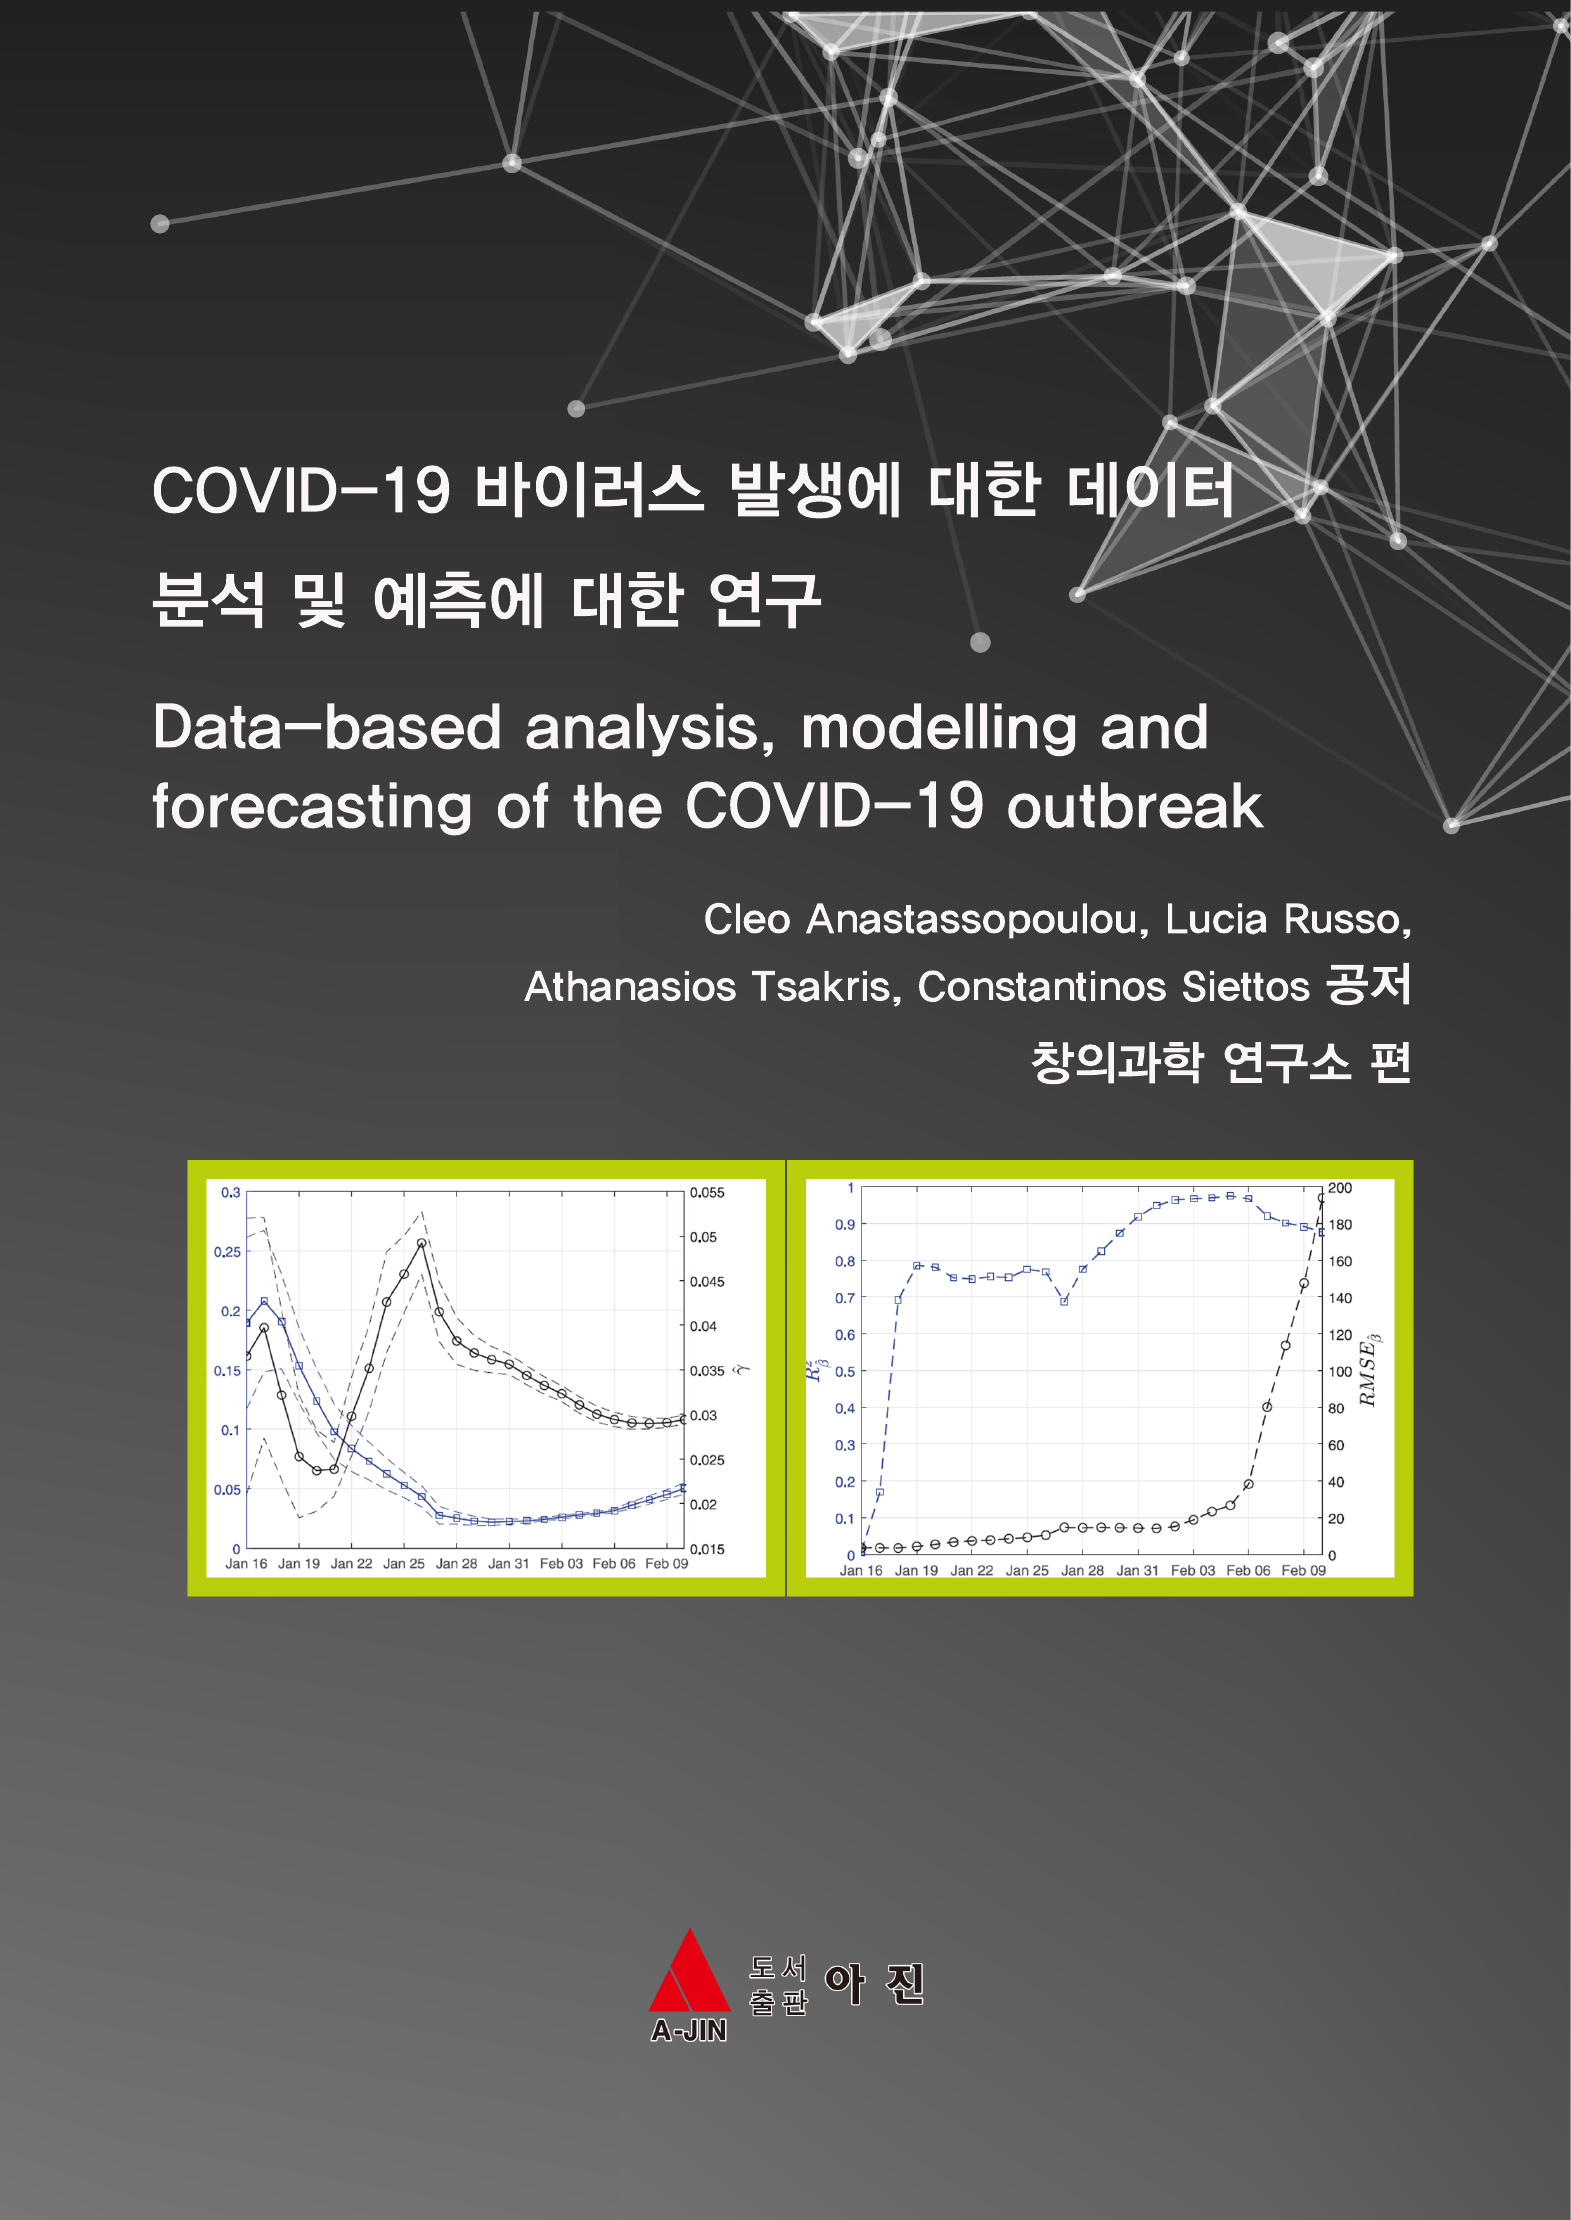 COVID-19 바이러스 발생에 대한 데이터 분석 및 예측에 대한 연구 (Data-based analysis, modelling and forecasting of the COVID-19 outbreak)